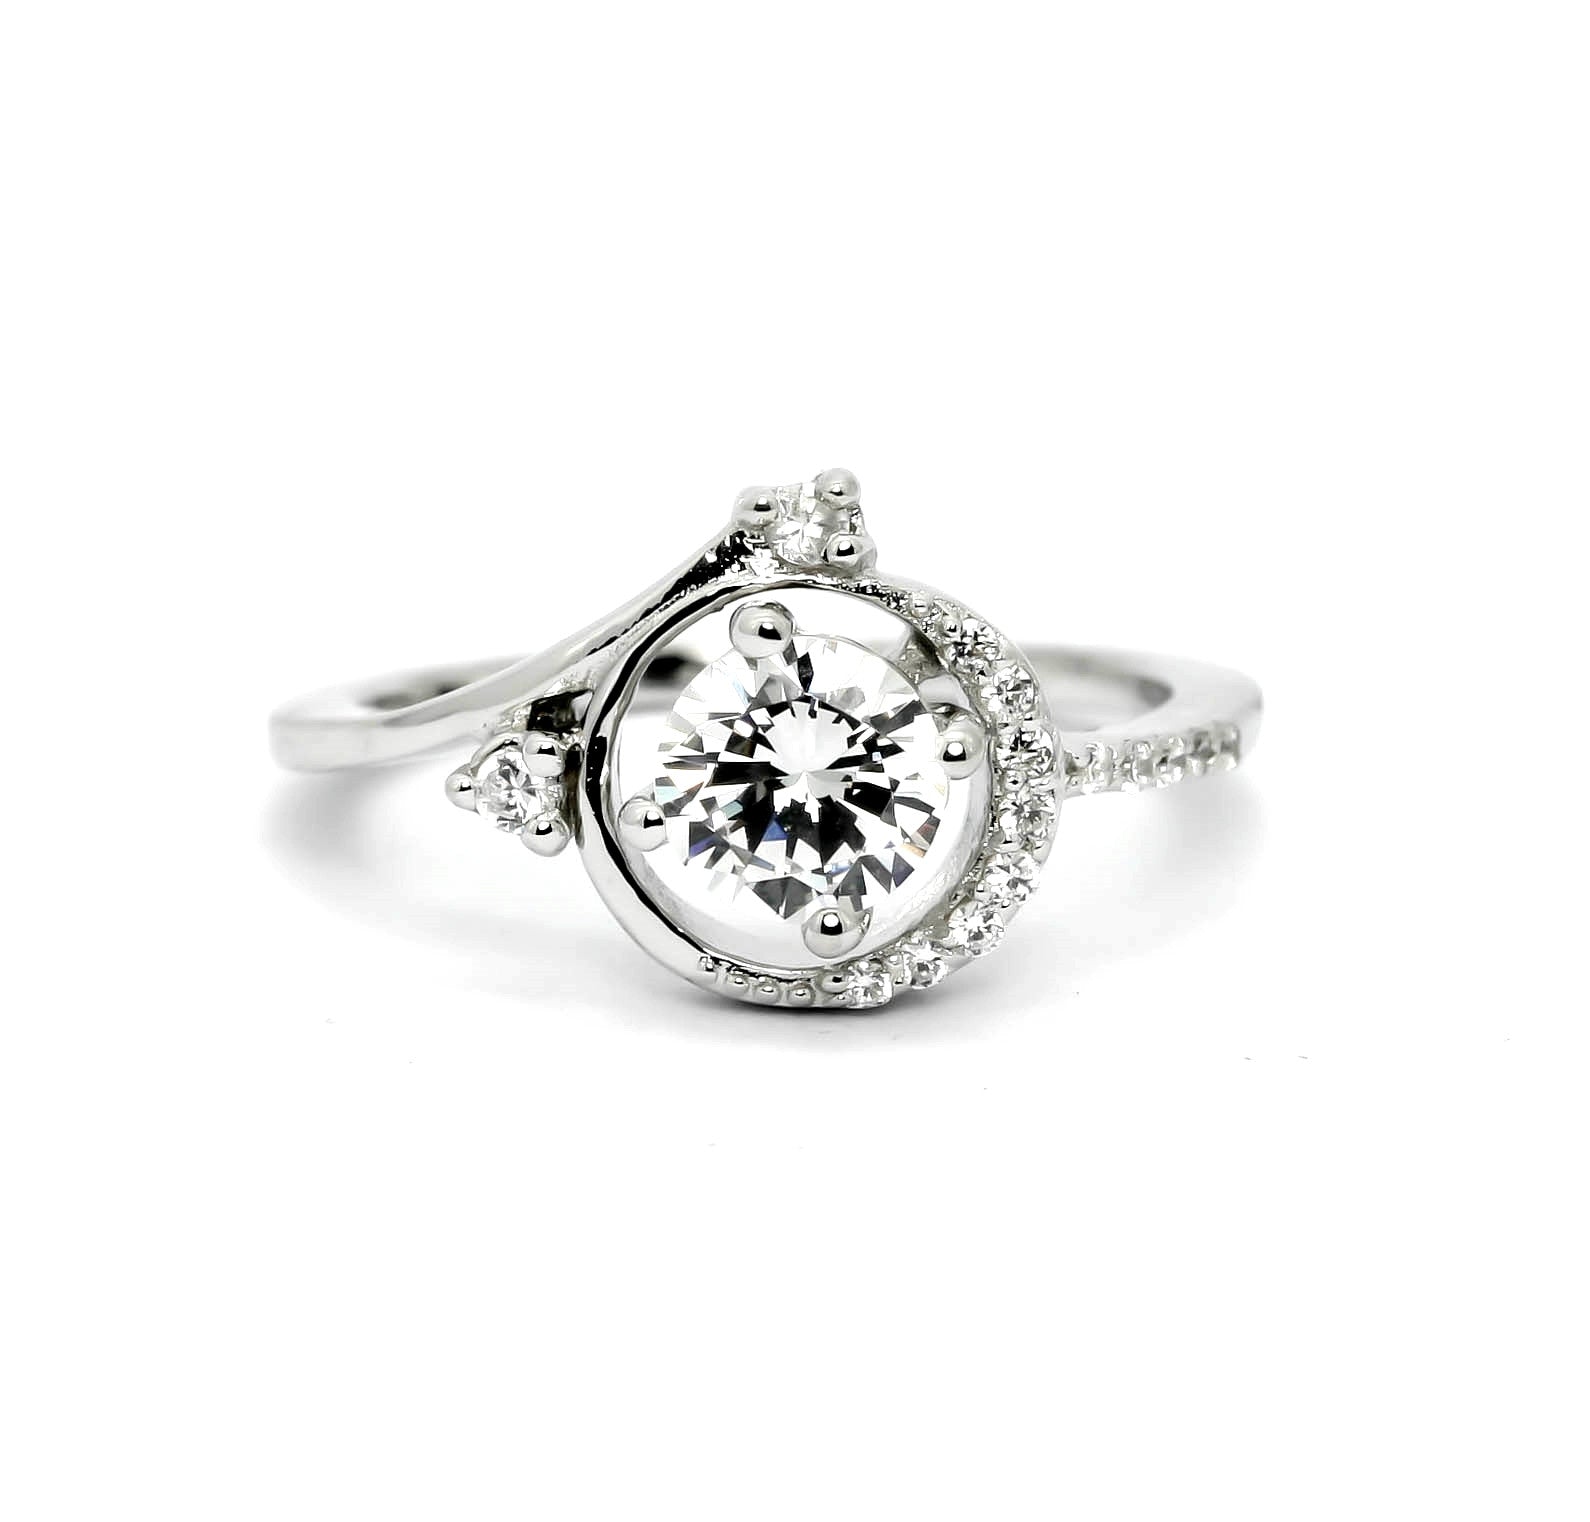 Moissanite Engagement Ring, Unique Halo Design With 1 Carat (6.5 mm) Forever One Moissanite & .18 Carat Diamonds, Anniversary Ring - FBY8220